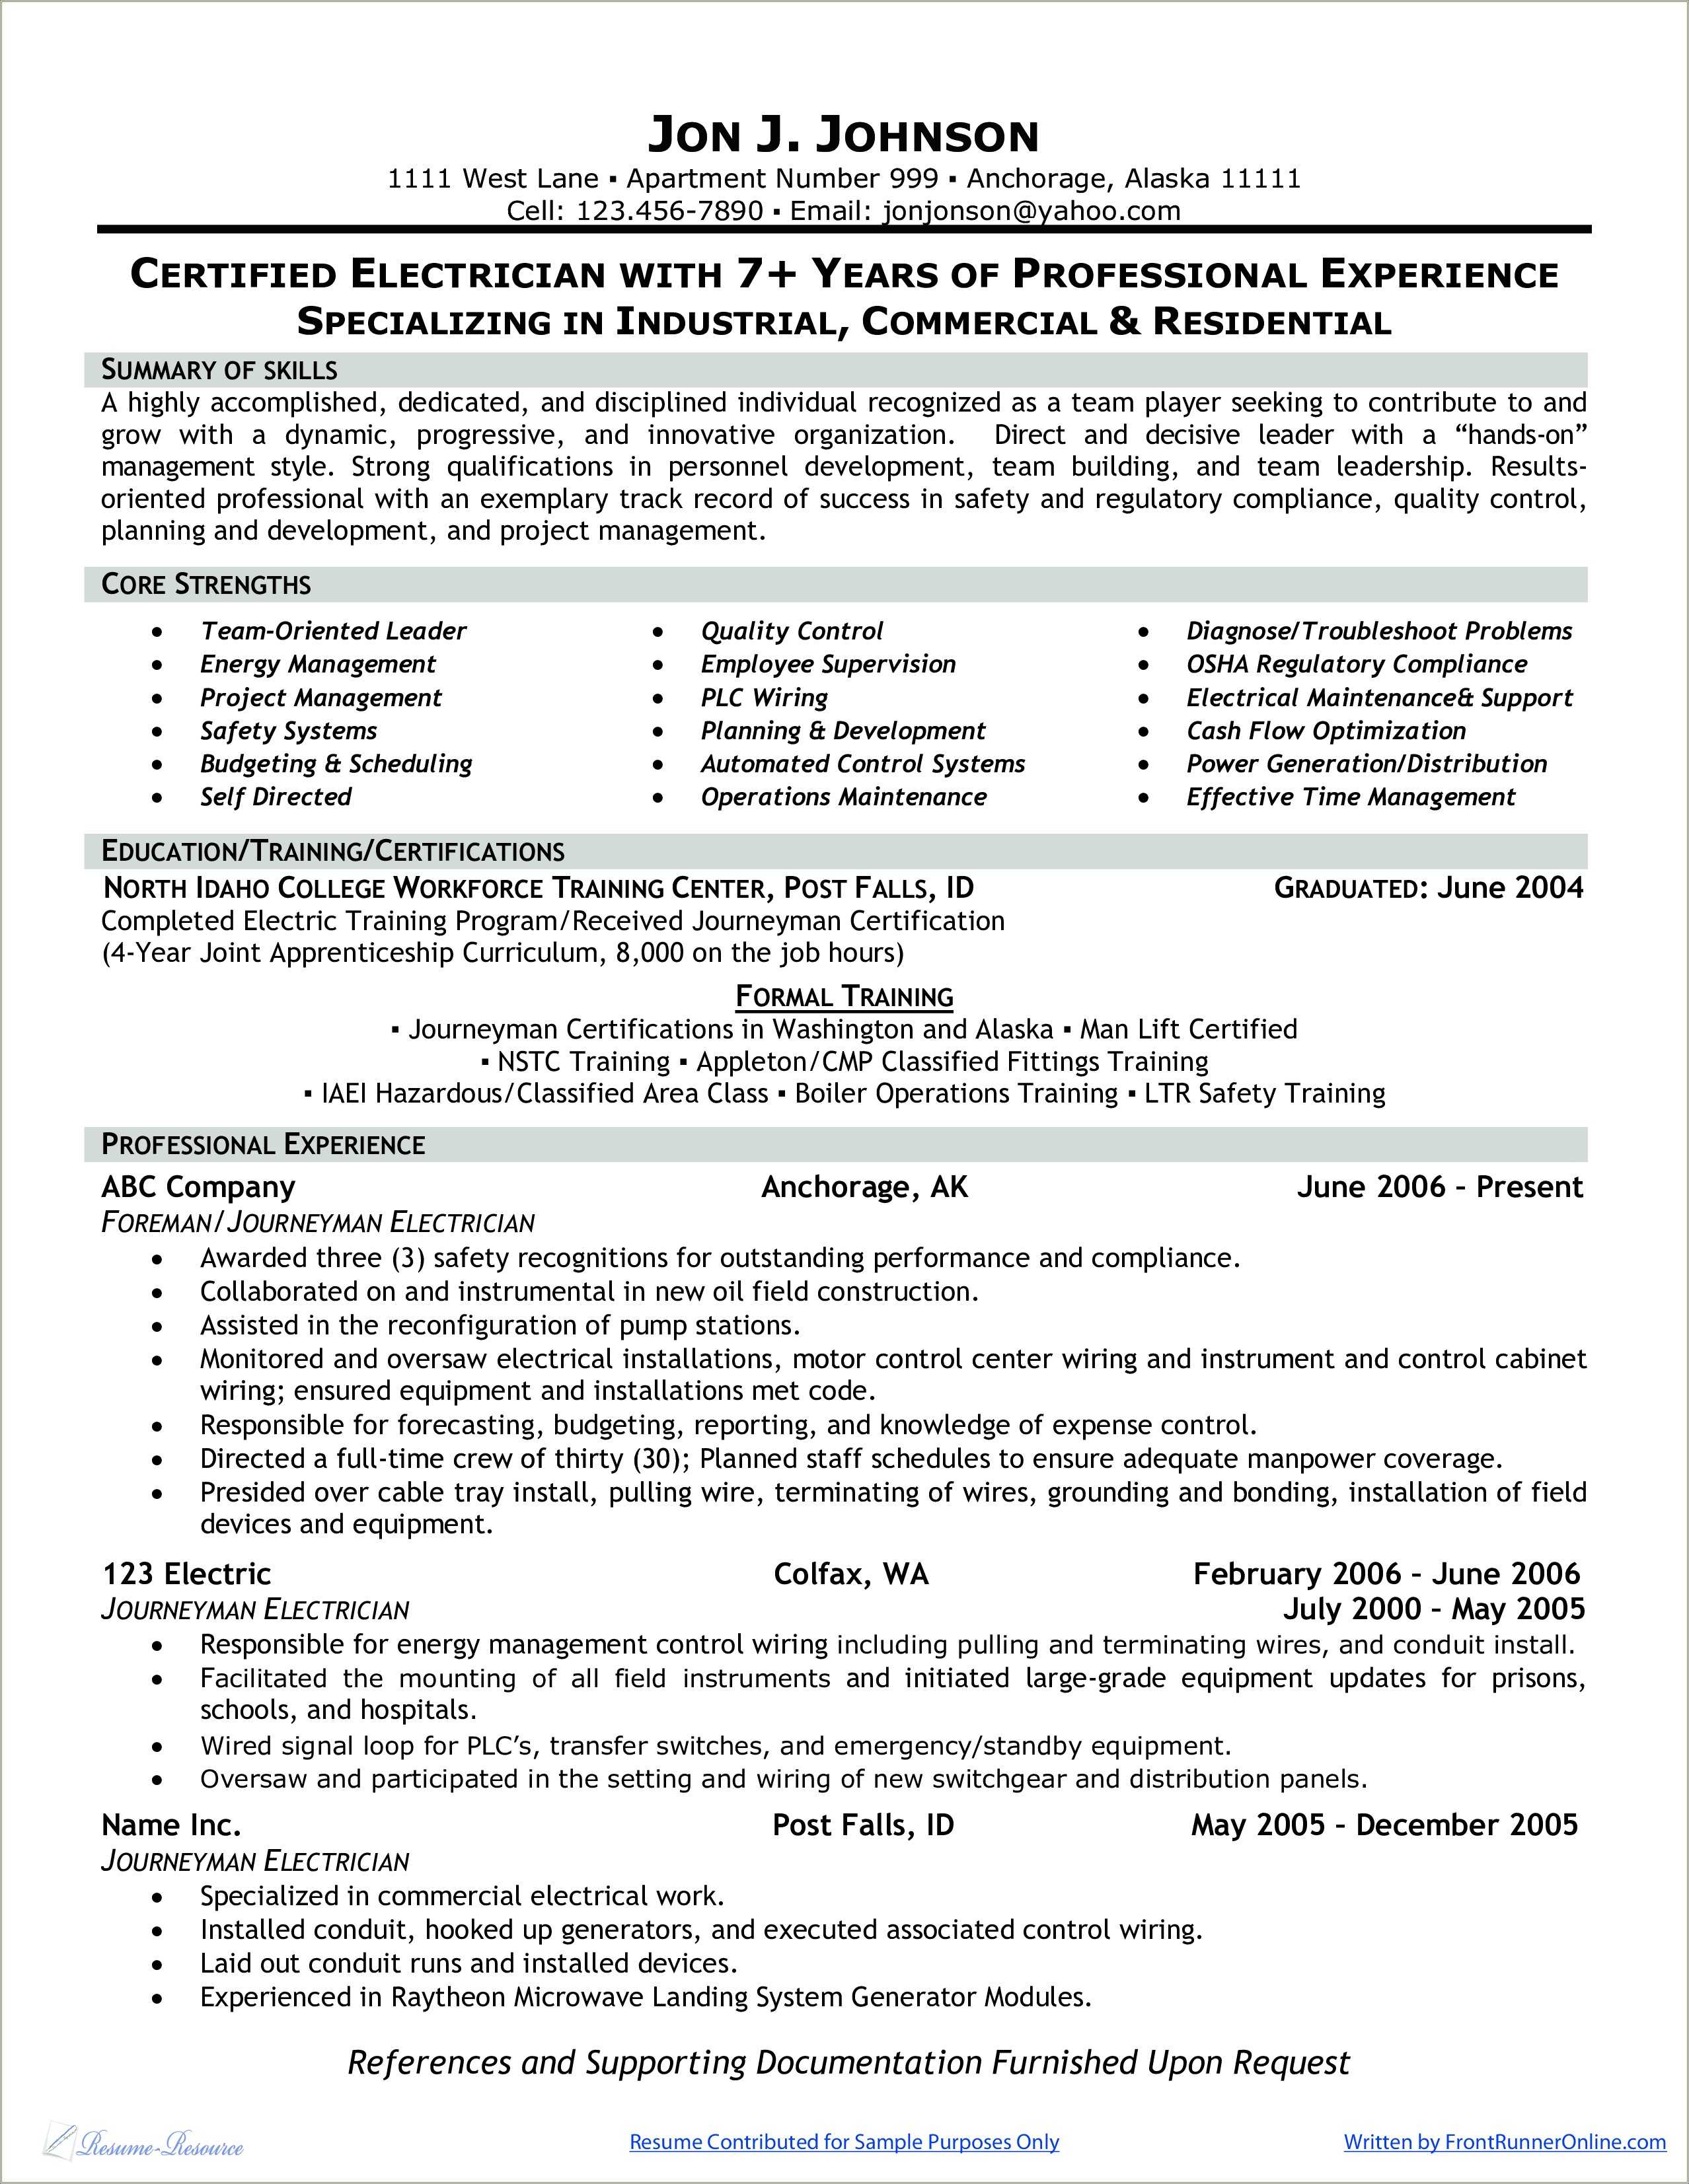 Sample Electrician Resume Cover Letter - Resume Example Gallery